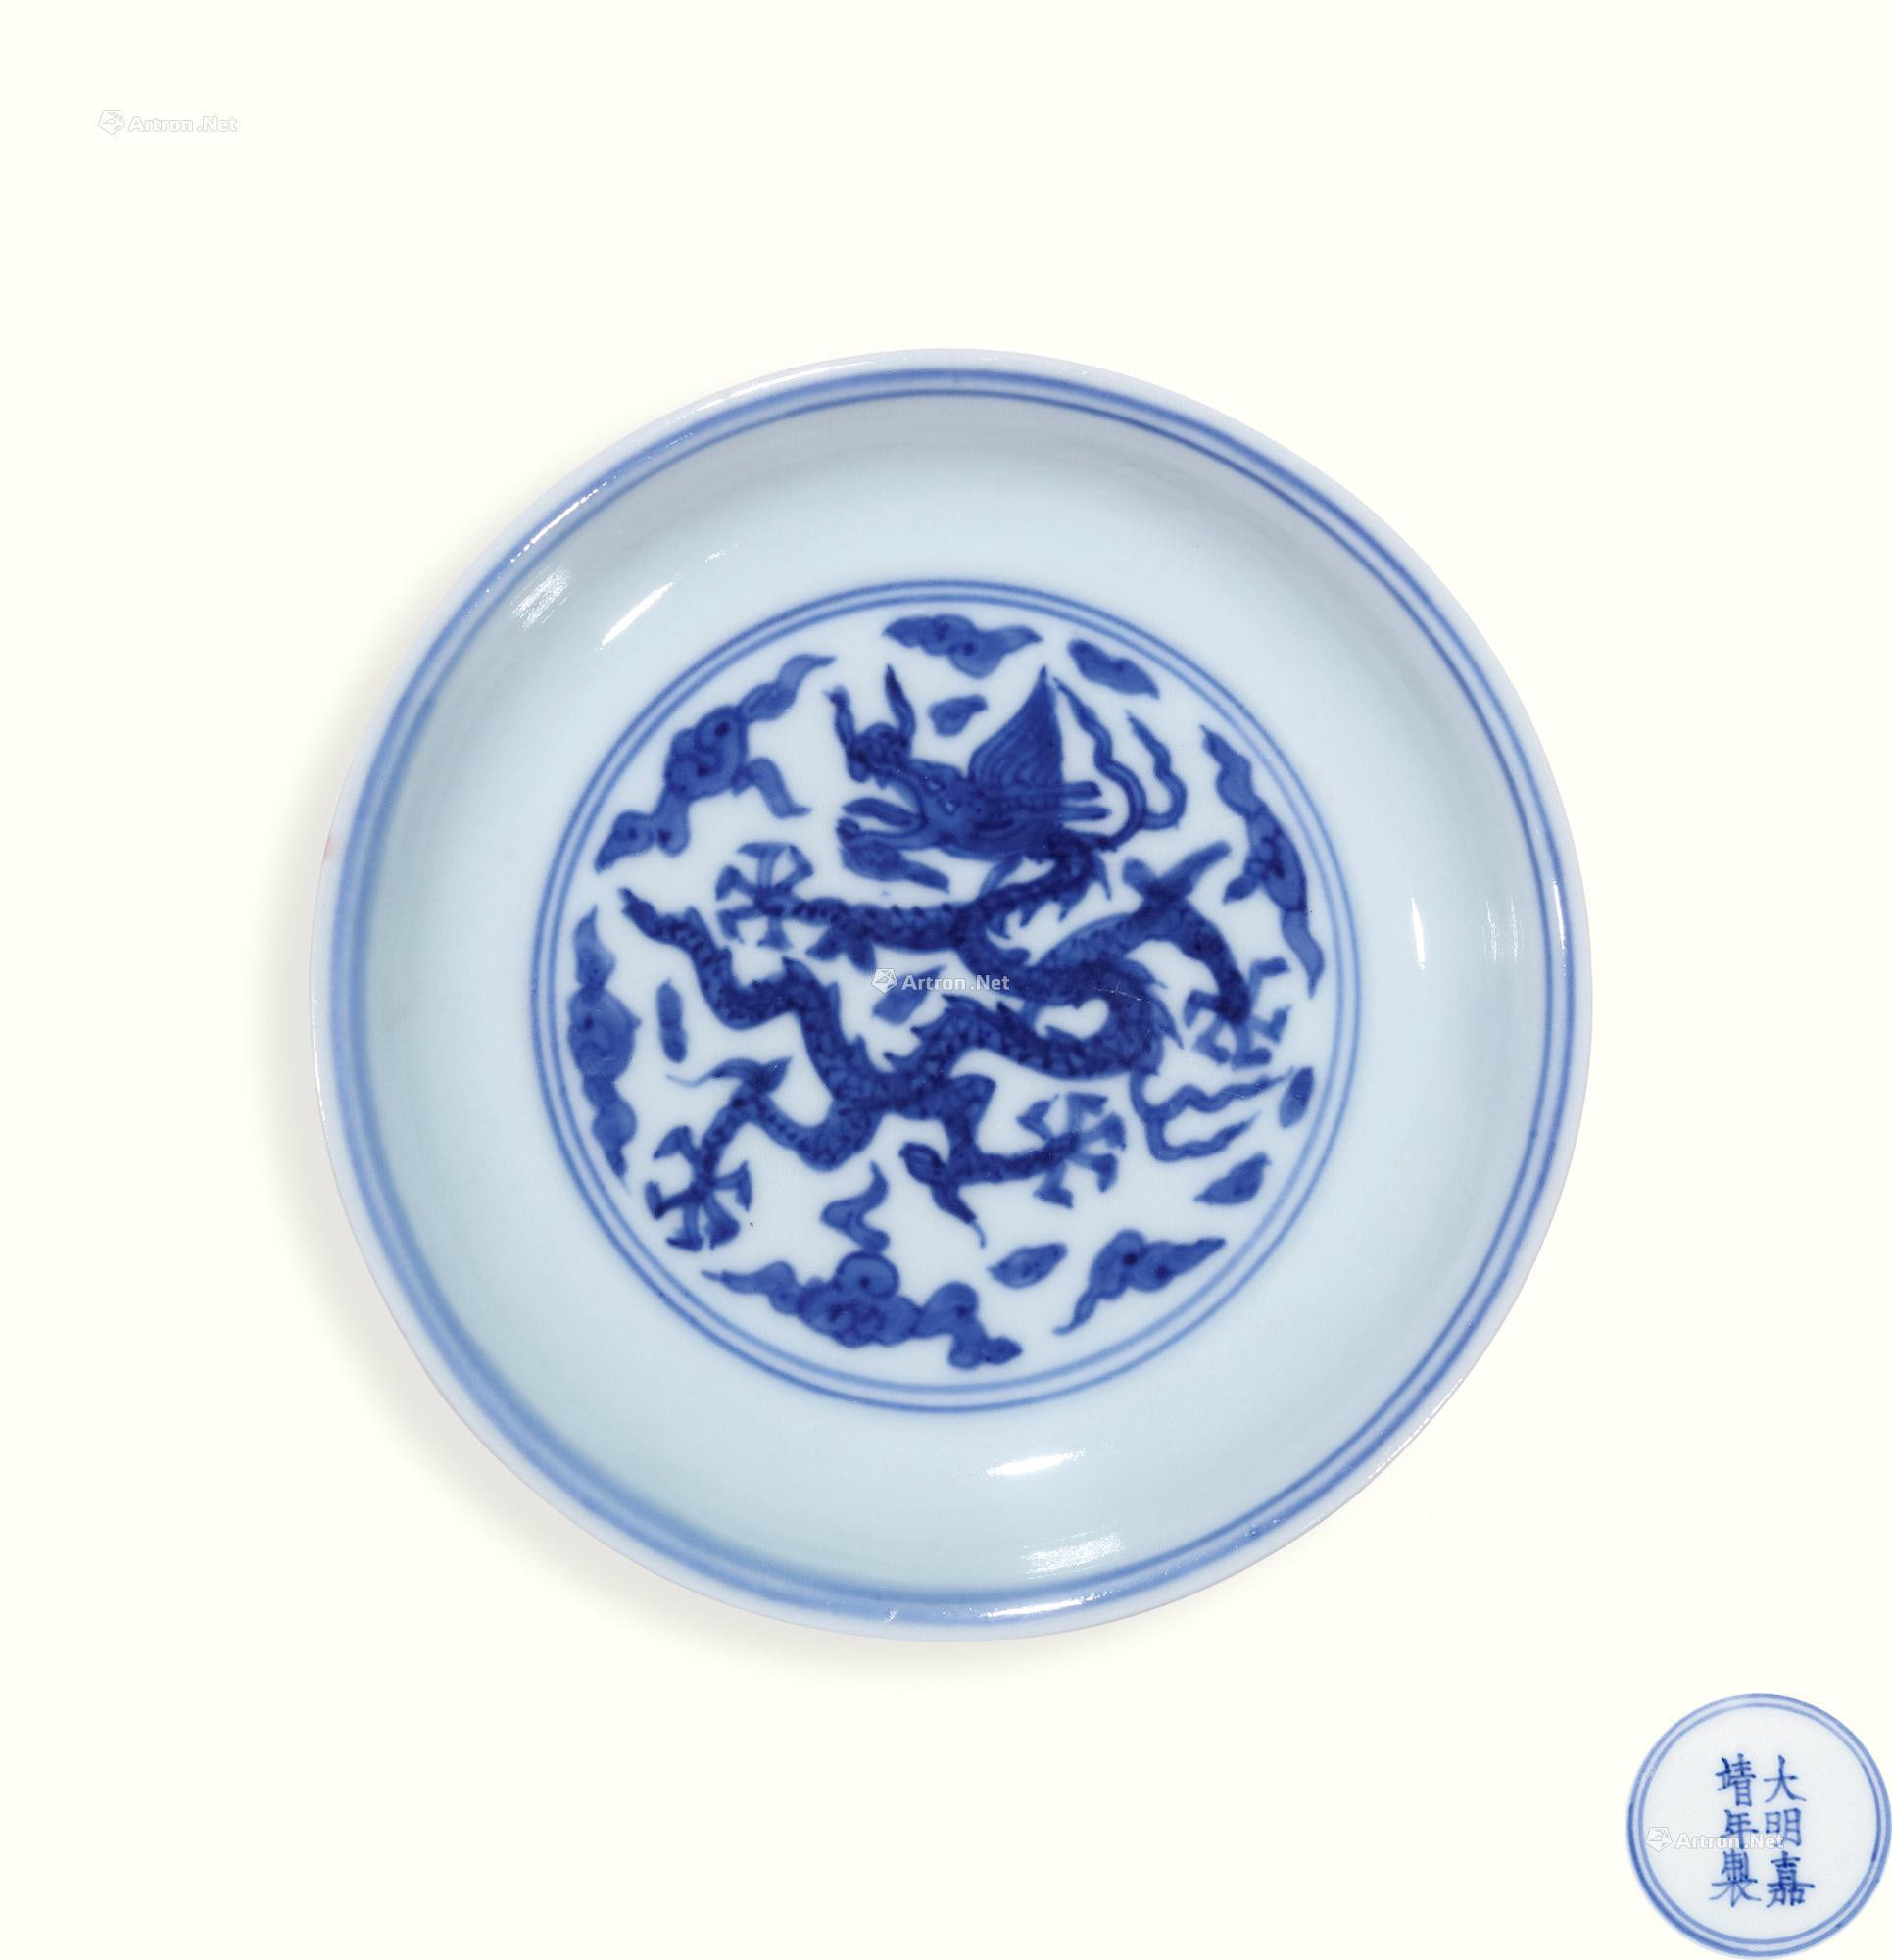 A BLUE AND WHITE PLATE WITH DRAGON DESIGN